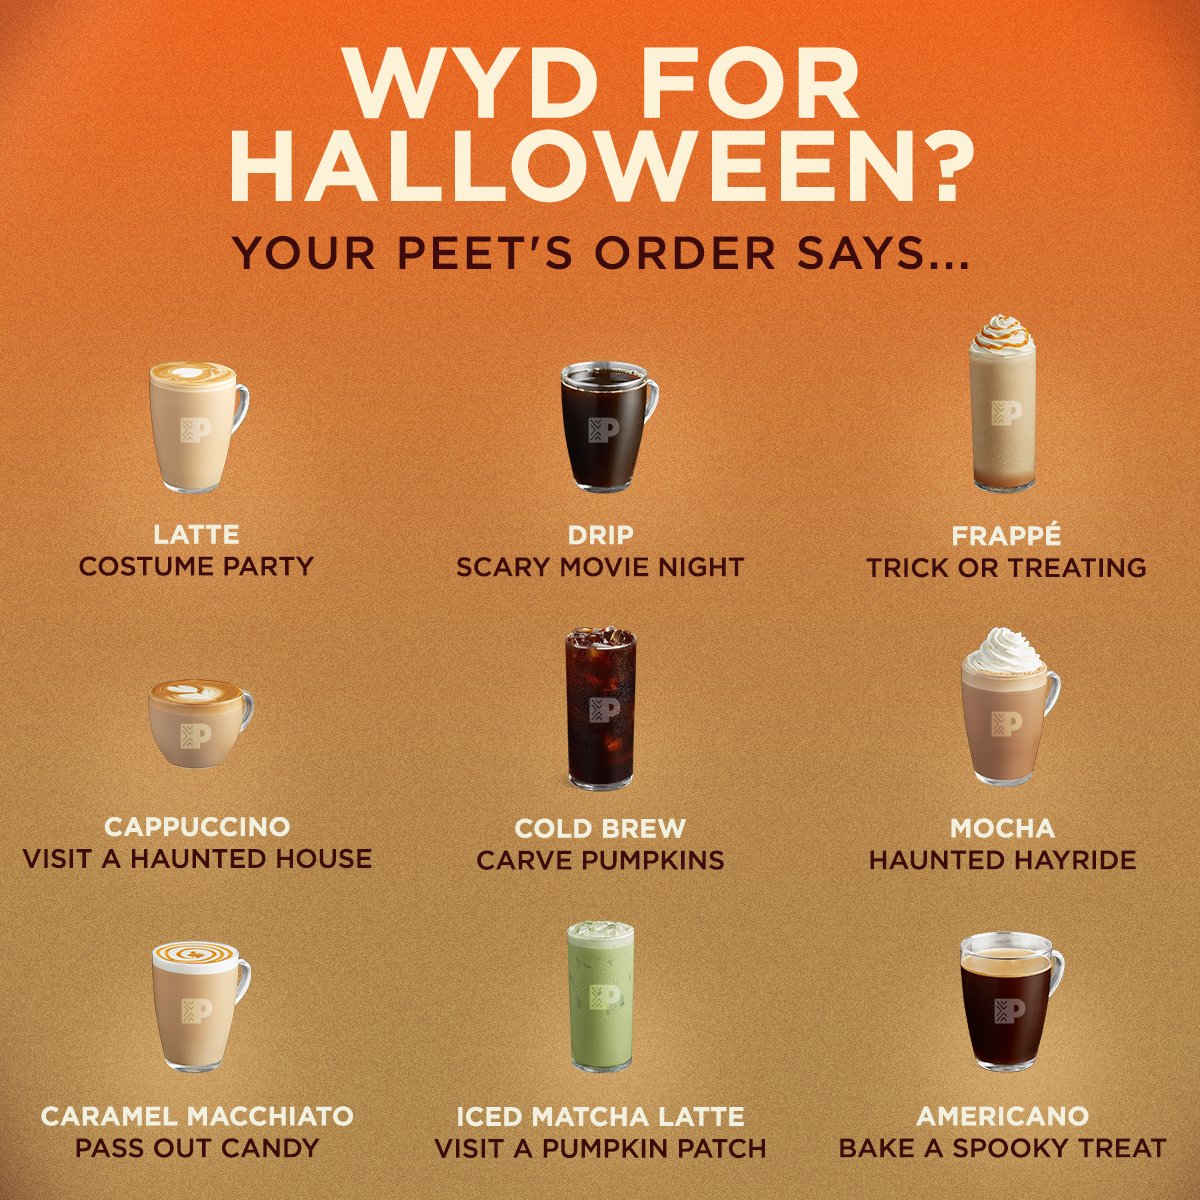 You're in for some spooky good fun this Halloween with Peet's. 🎃🍁❤️ WYD on 10/31?